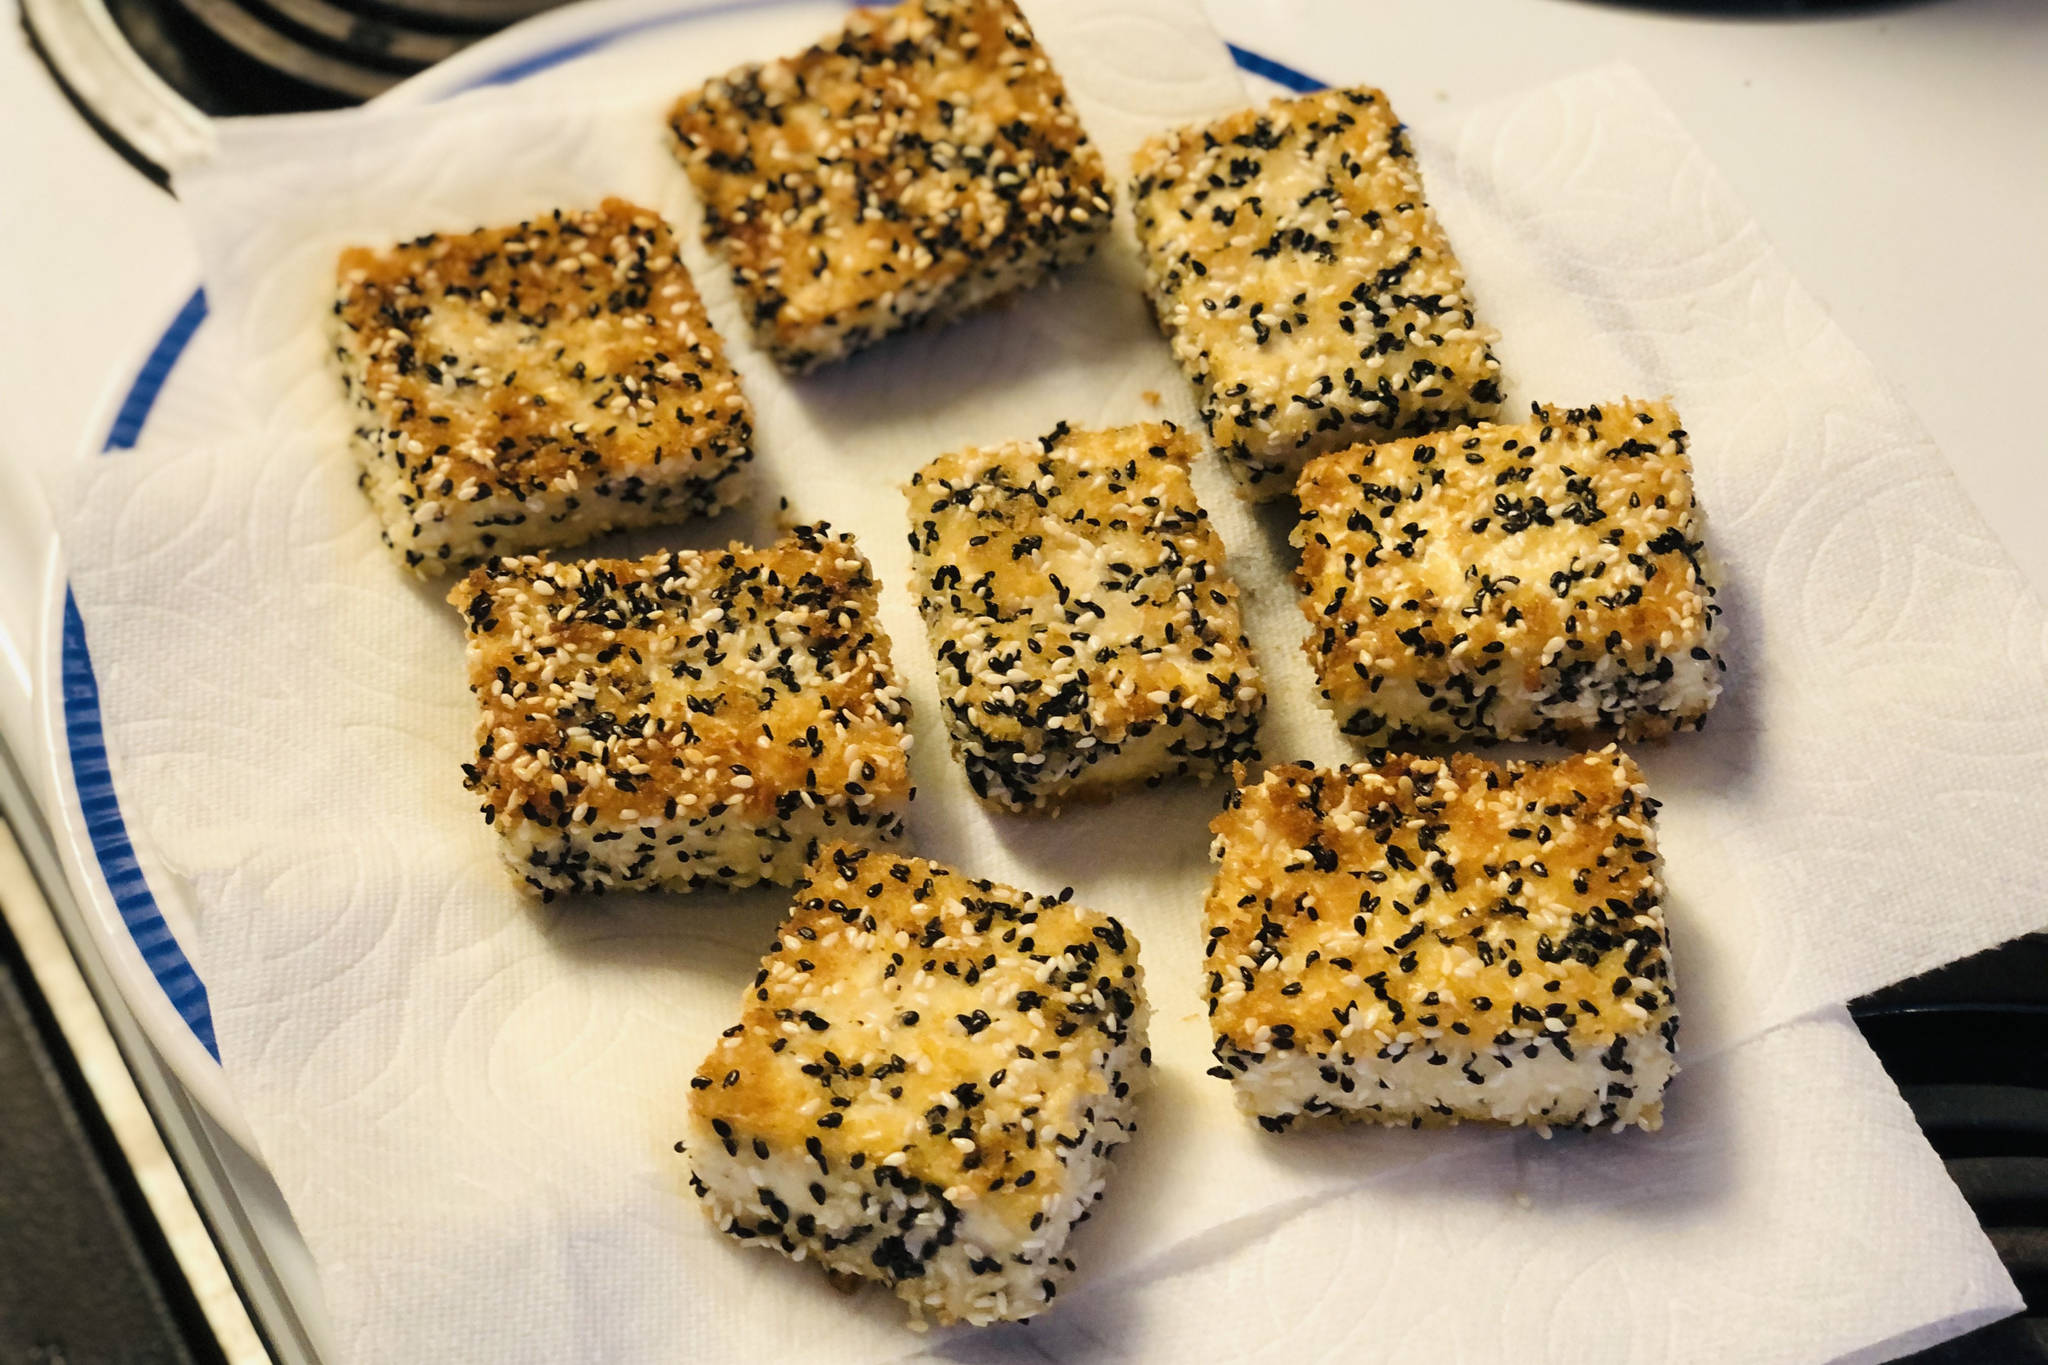 Crunchy, panko- and sesame seed-coated tofu makes for an easy meal, photographed on Saturday, March 27, 2021, in Anchorage, Alaska. (Photo by Victoria Petersen/Peninsula Clarion)